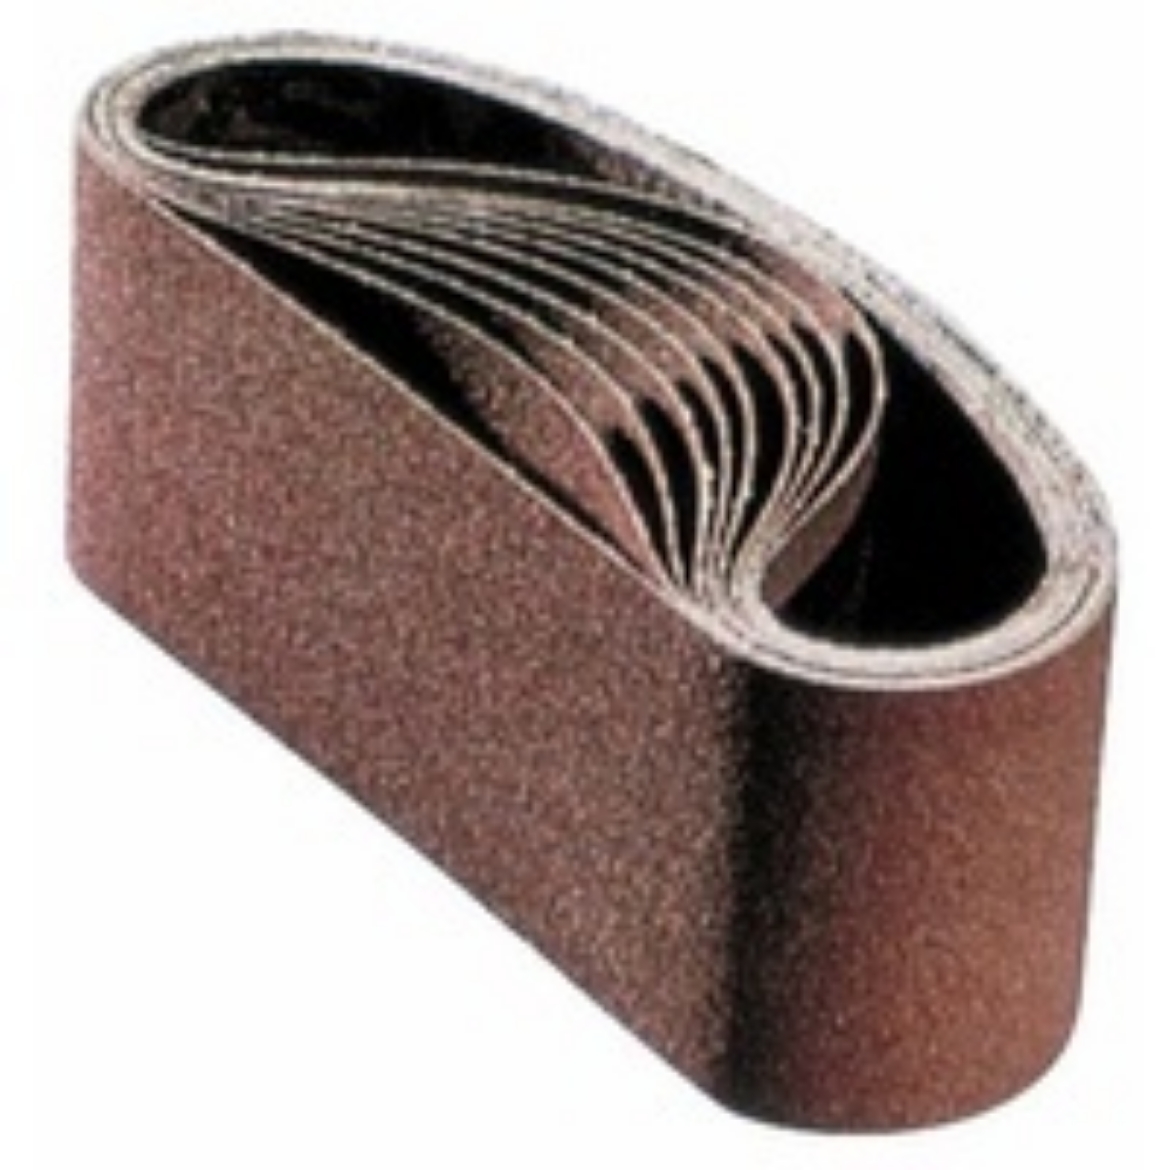 Picture of PFERD LINISHING BELT - ALUMINIUM OXIDE - GP - 100 X 914 AX 120 GRIT (PACK OF 6)